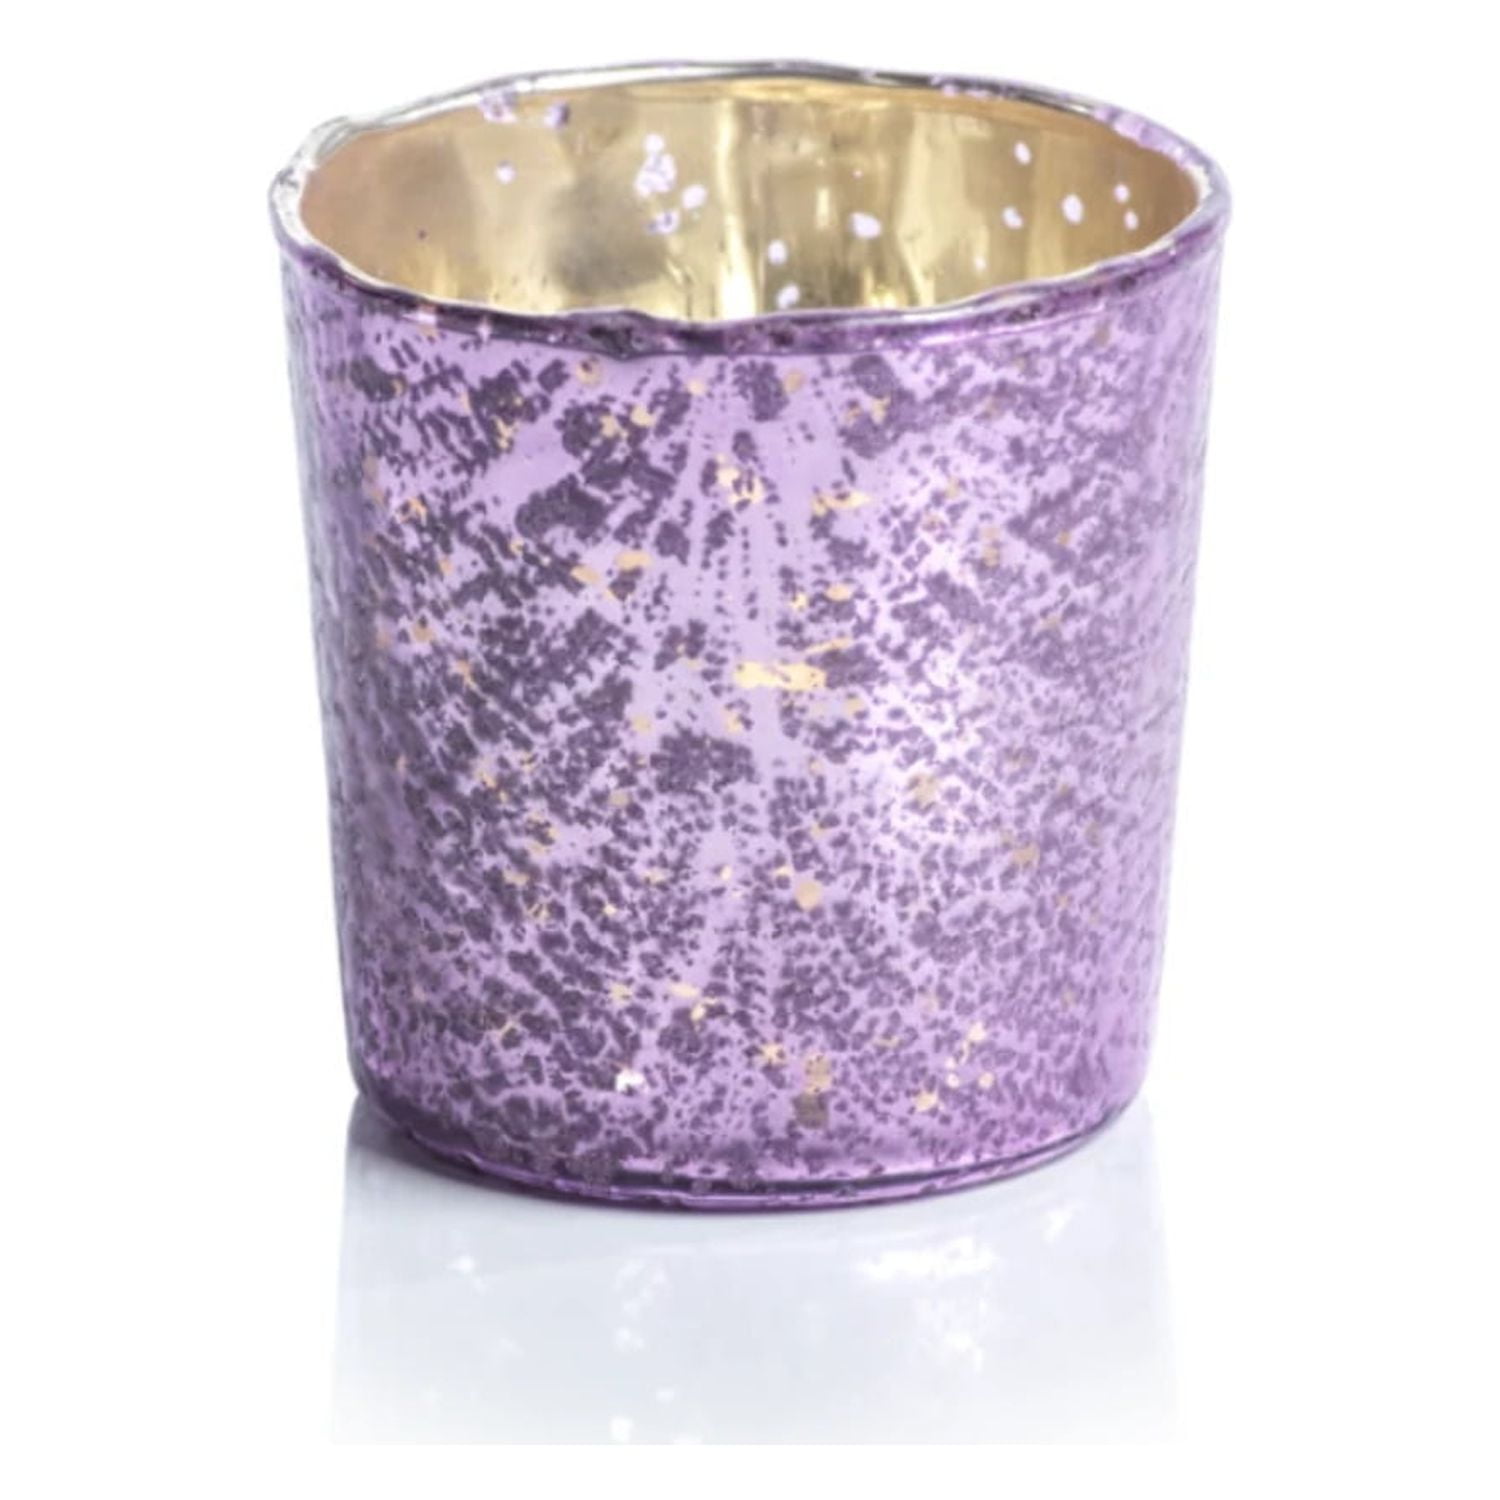 Zodax Metallic Pillar Candle with Gold & Silver Glitter